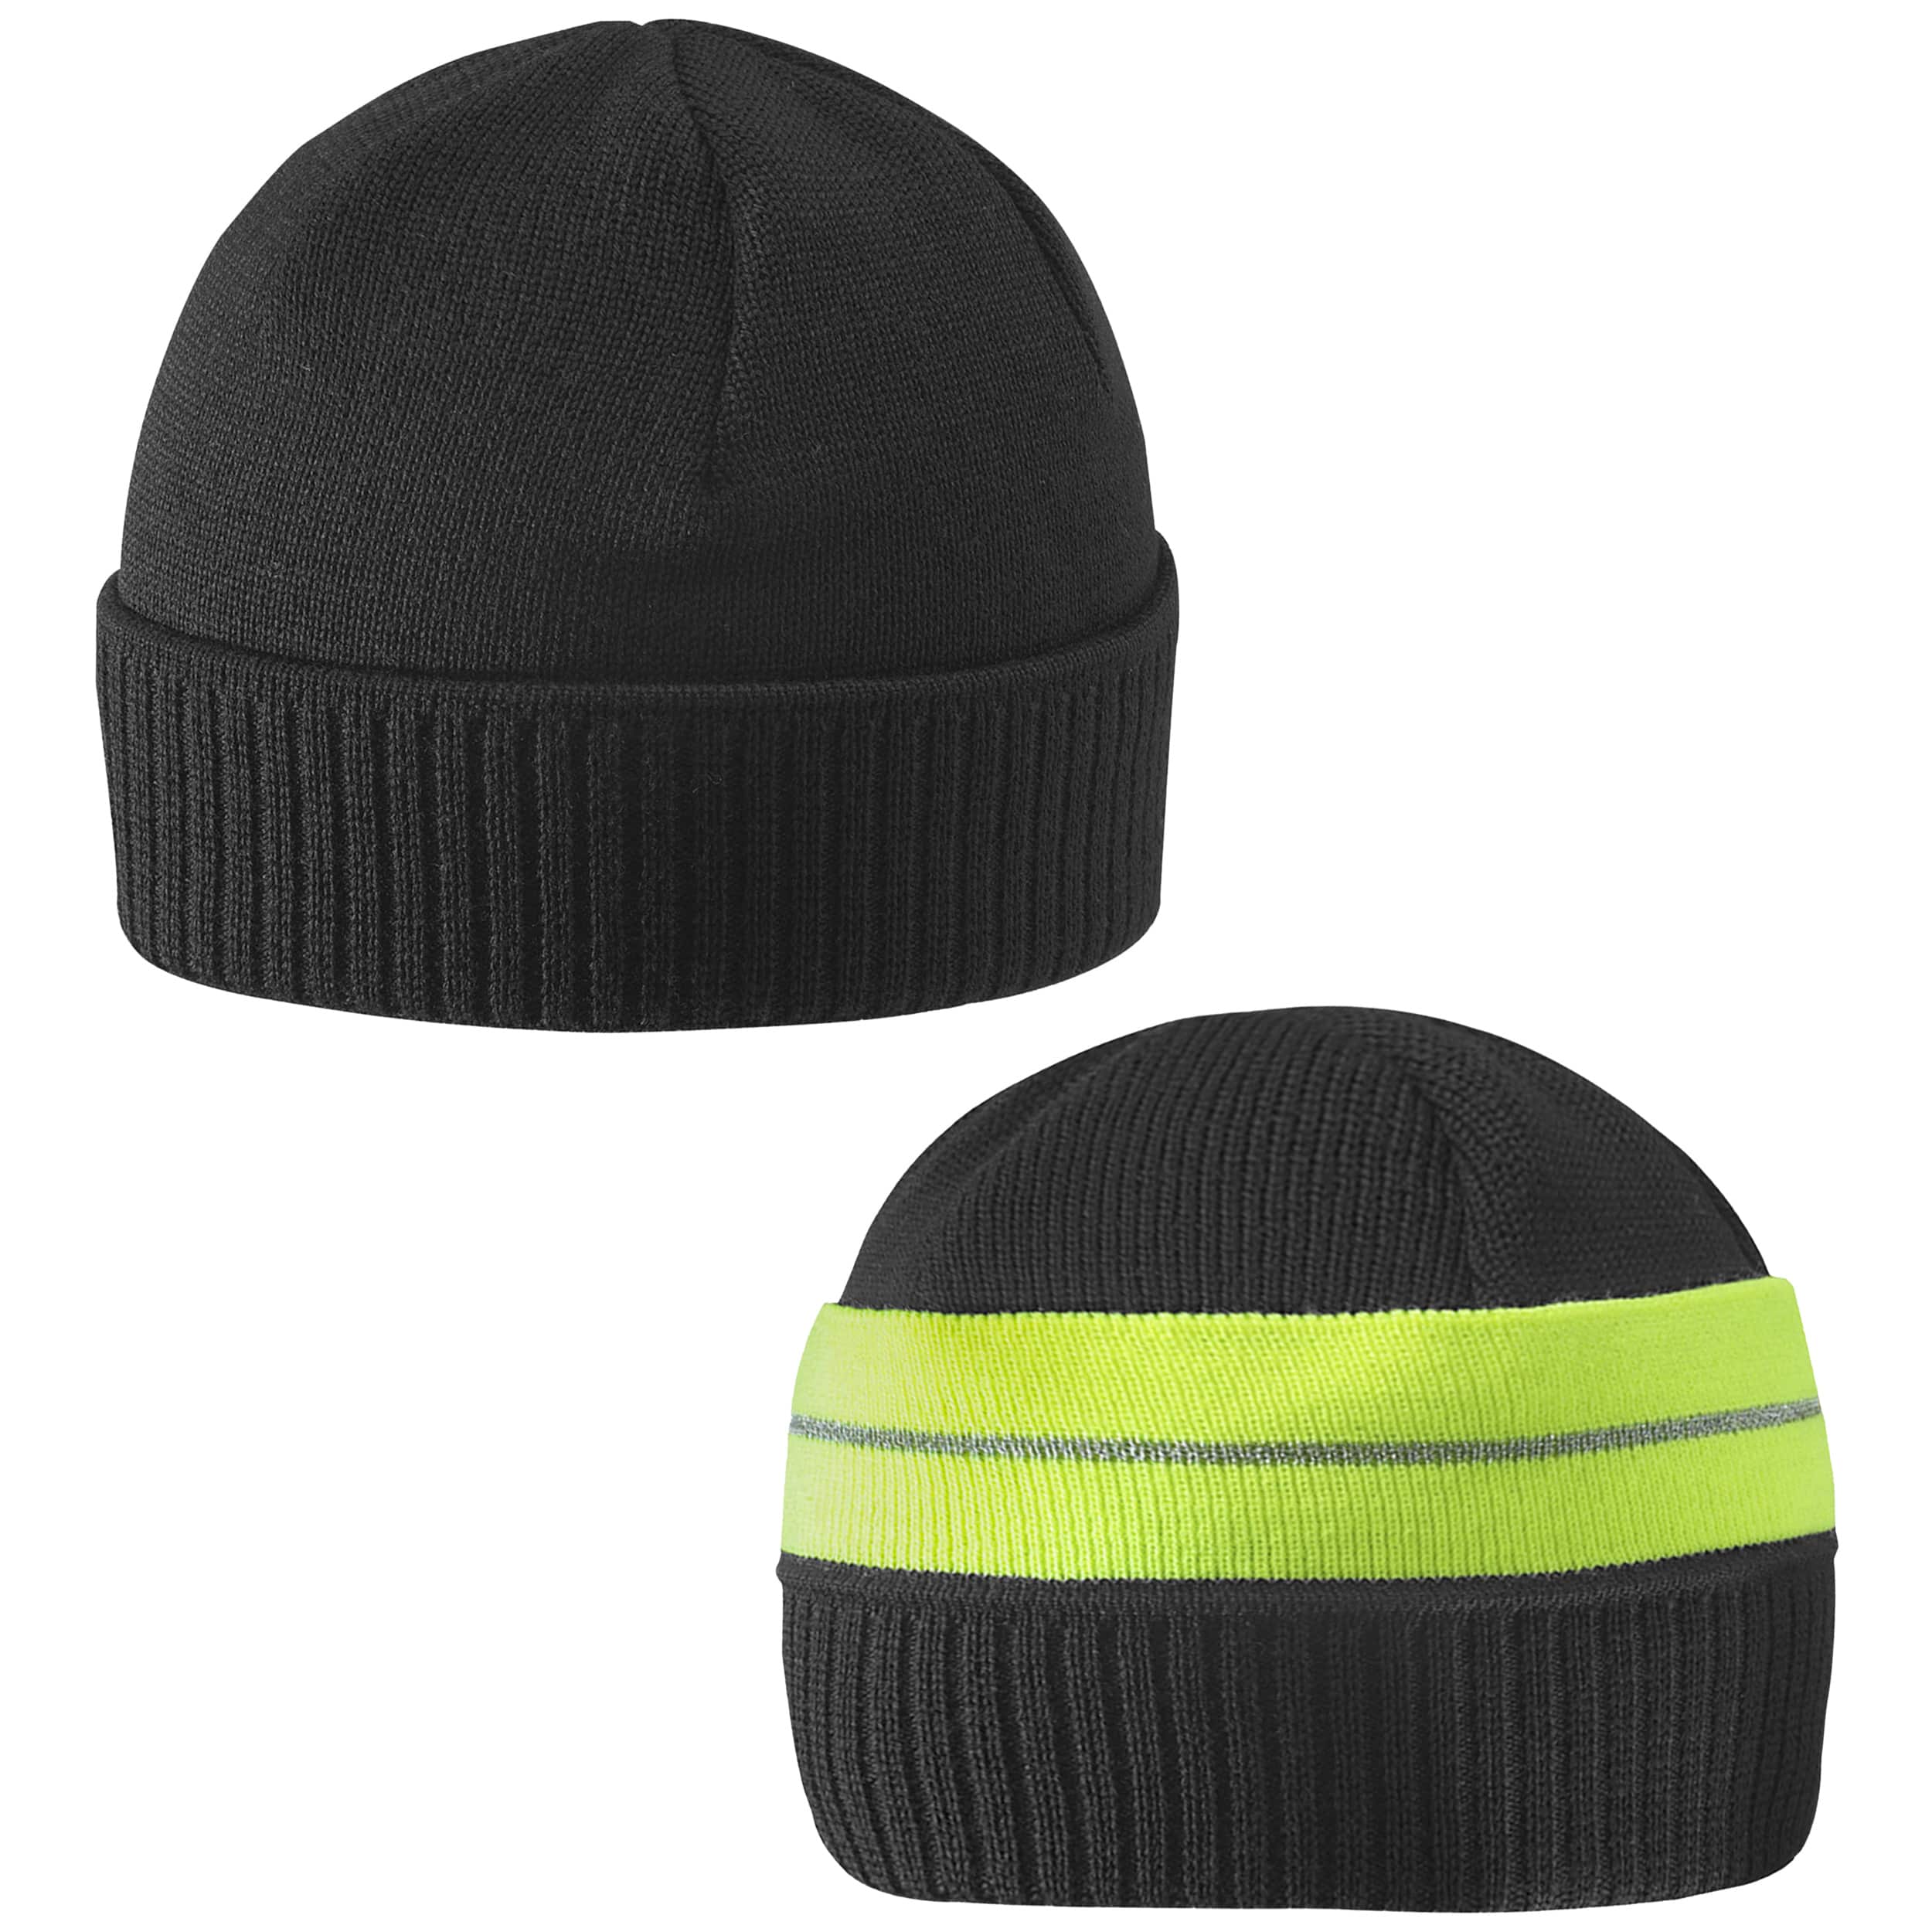 Blakely Neonsign Knit Hat by Stetson - 59,00 €